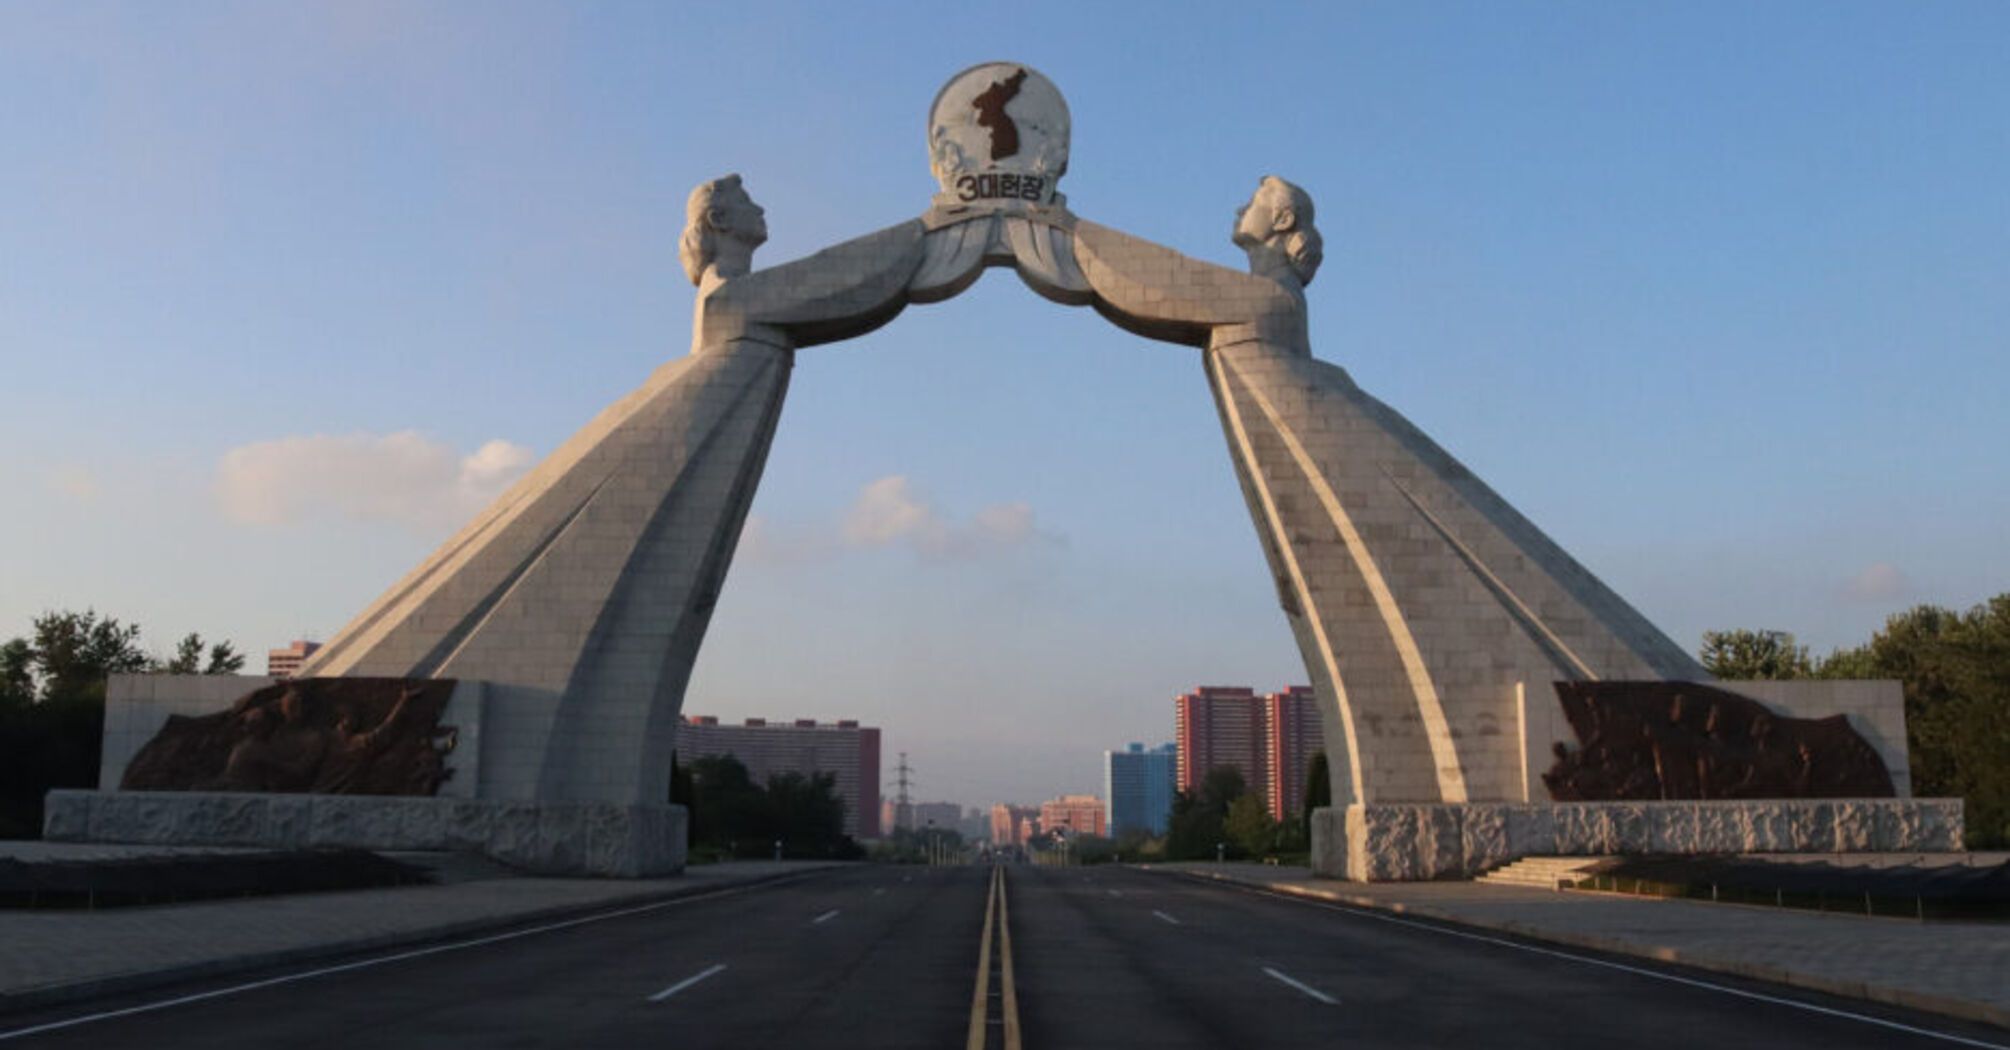 The Arch of Reunification with South Korea was demolished in the DPRK